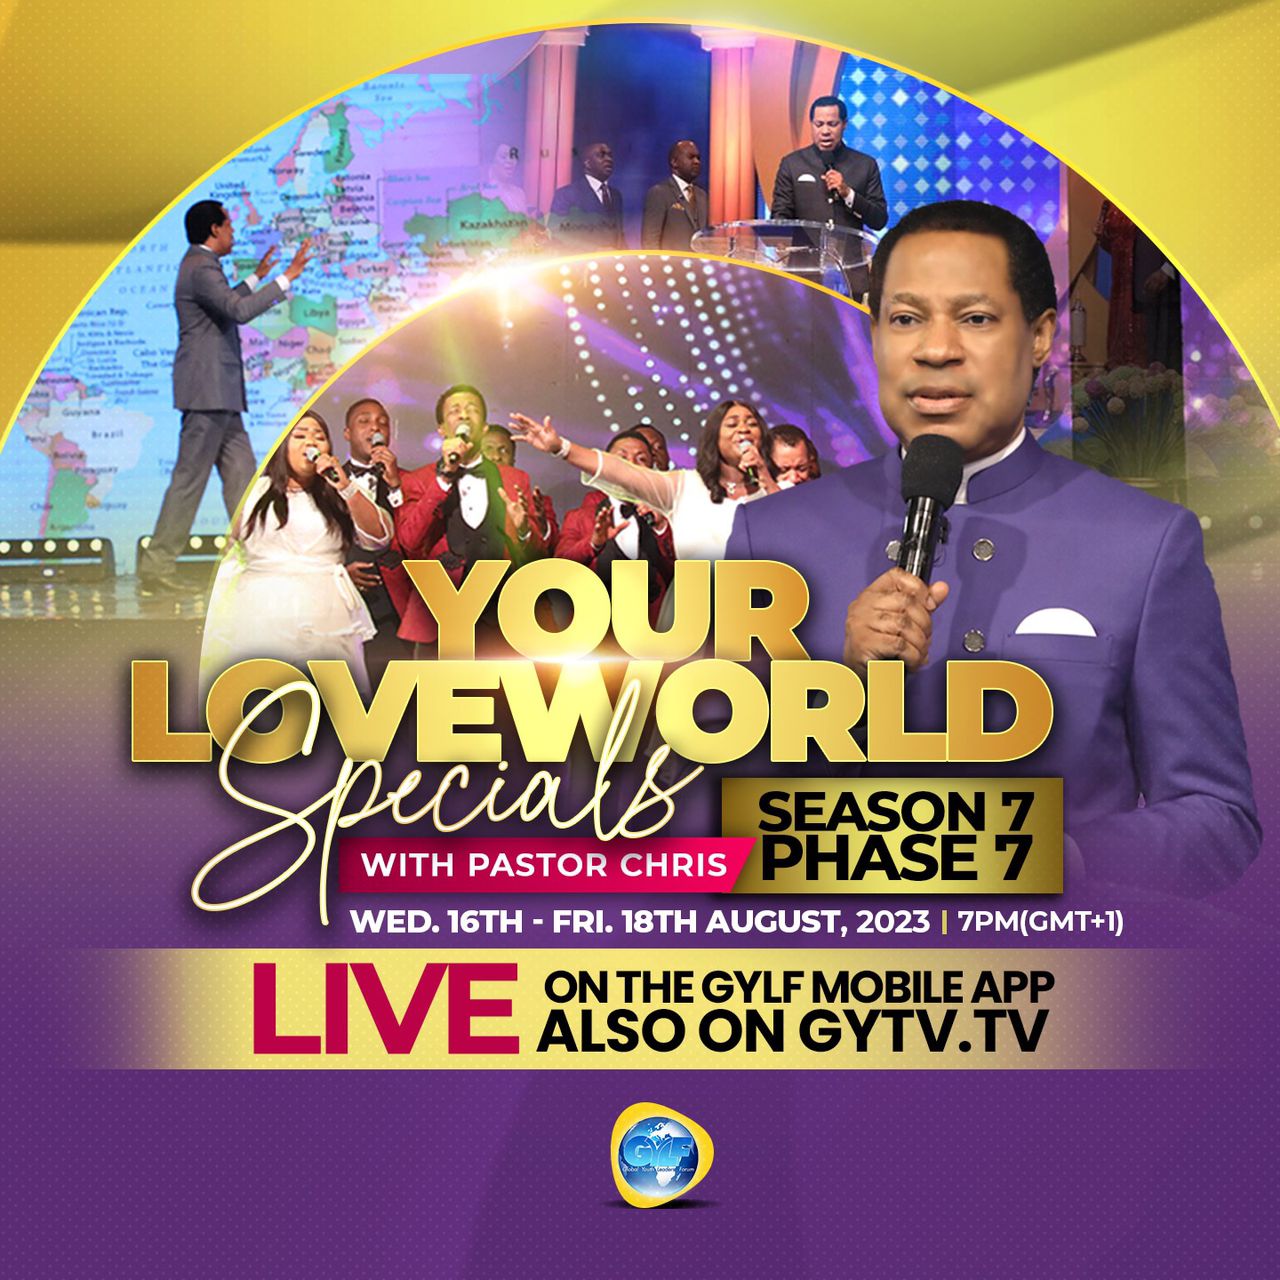 YOUR LOVEWORLD SPECIALS WITH PASTOR CHRIS